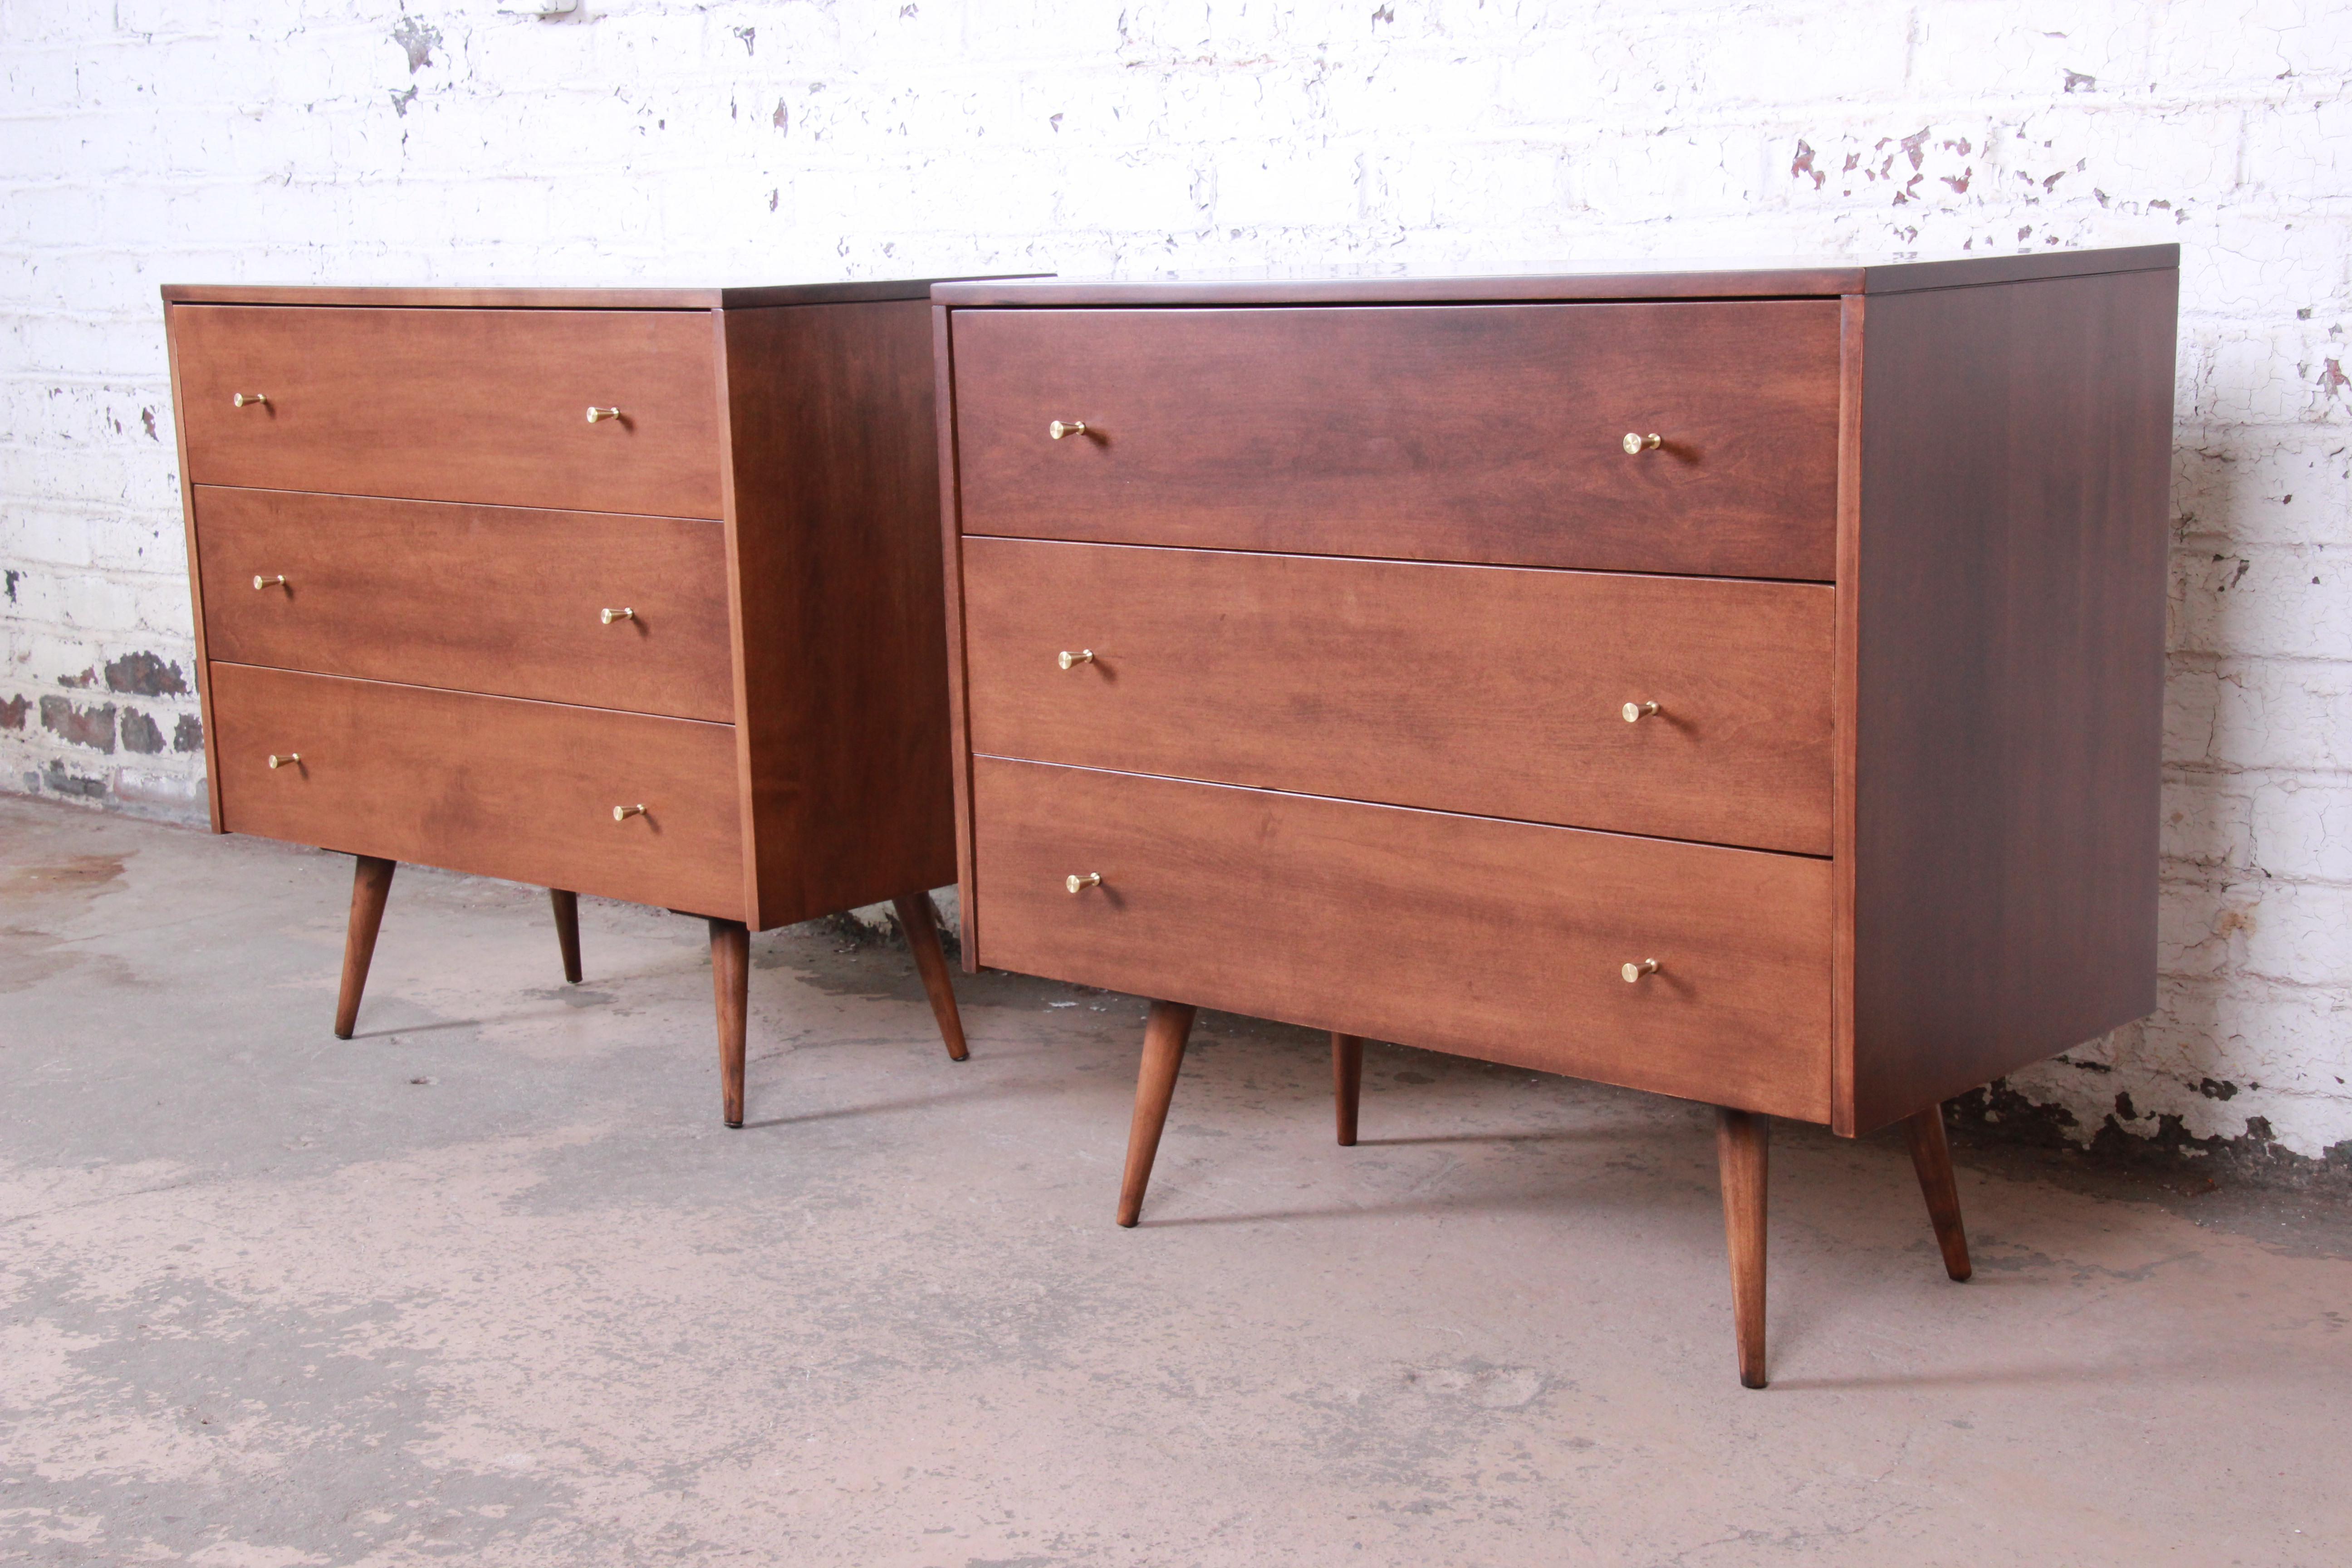 A stunning pair of Mid-Century Modern three-drawer bachelor chests or bedside tables designed by Paul McCobb for his Planner Group line for Winchendon Furniture. The chests feature beautiful wood grain with solid birch construction and McCobb's